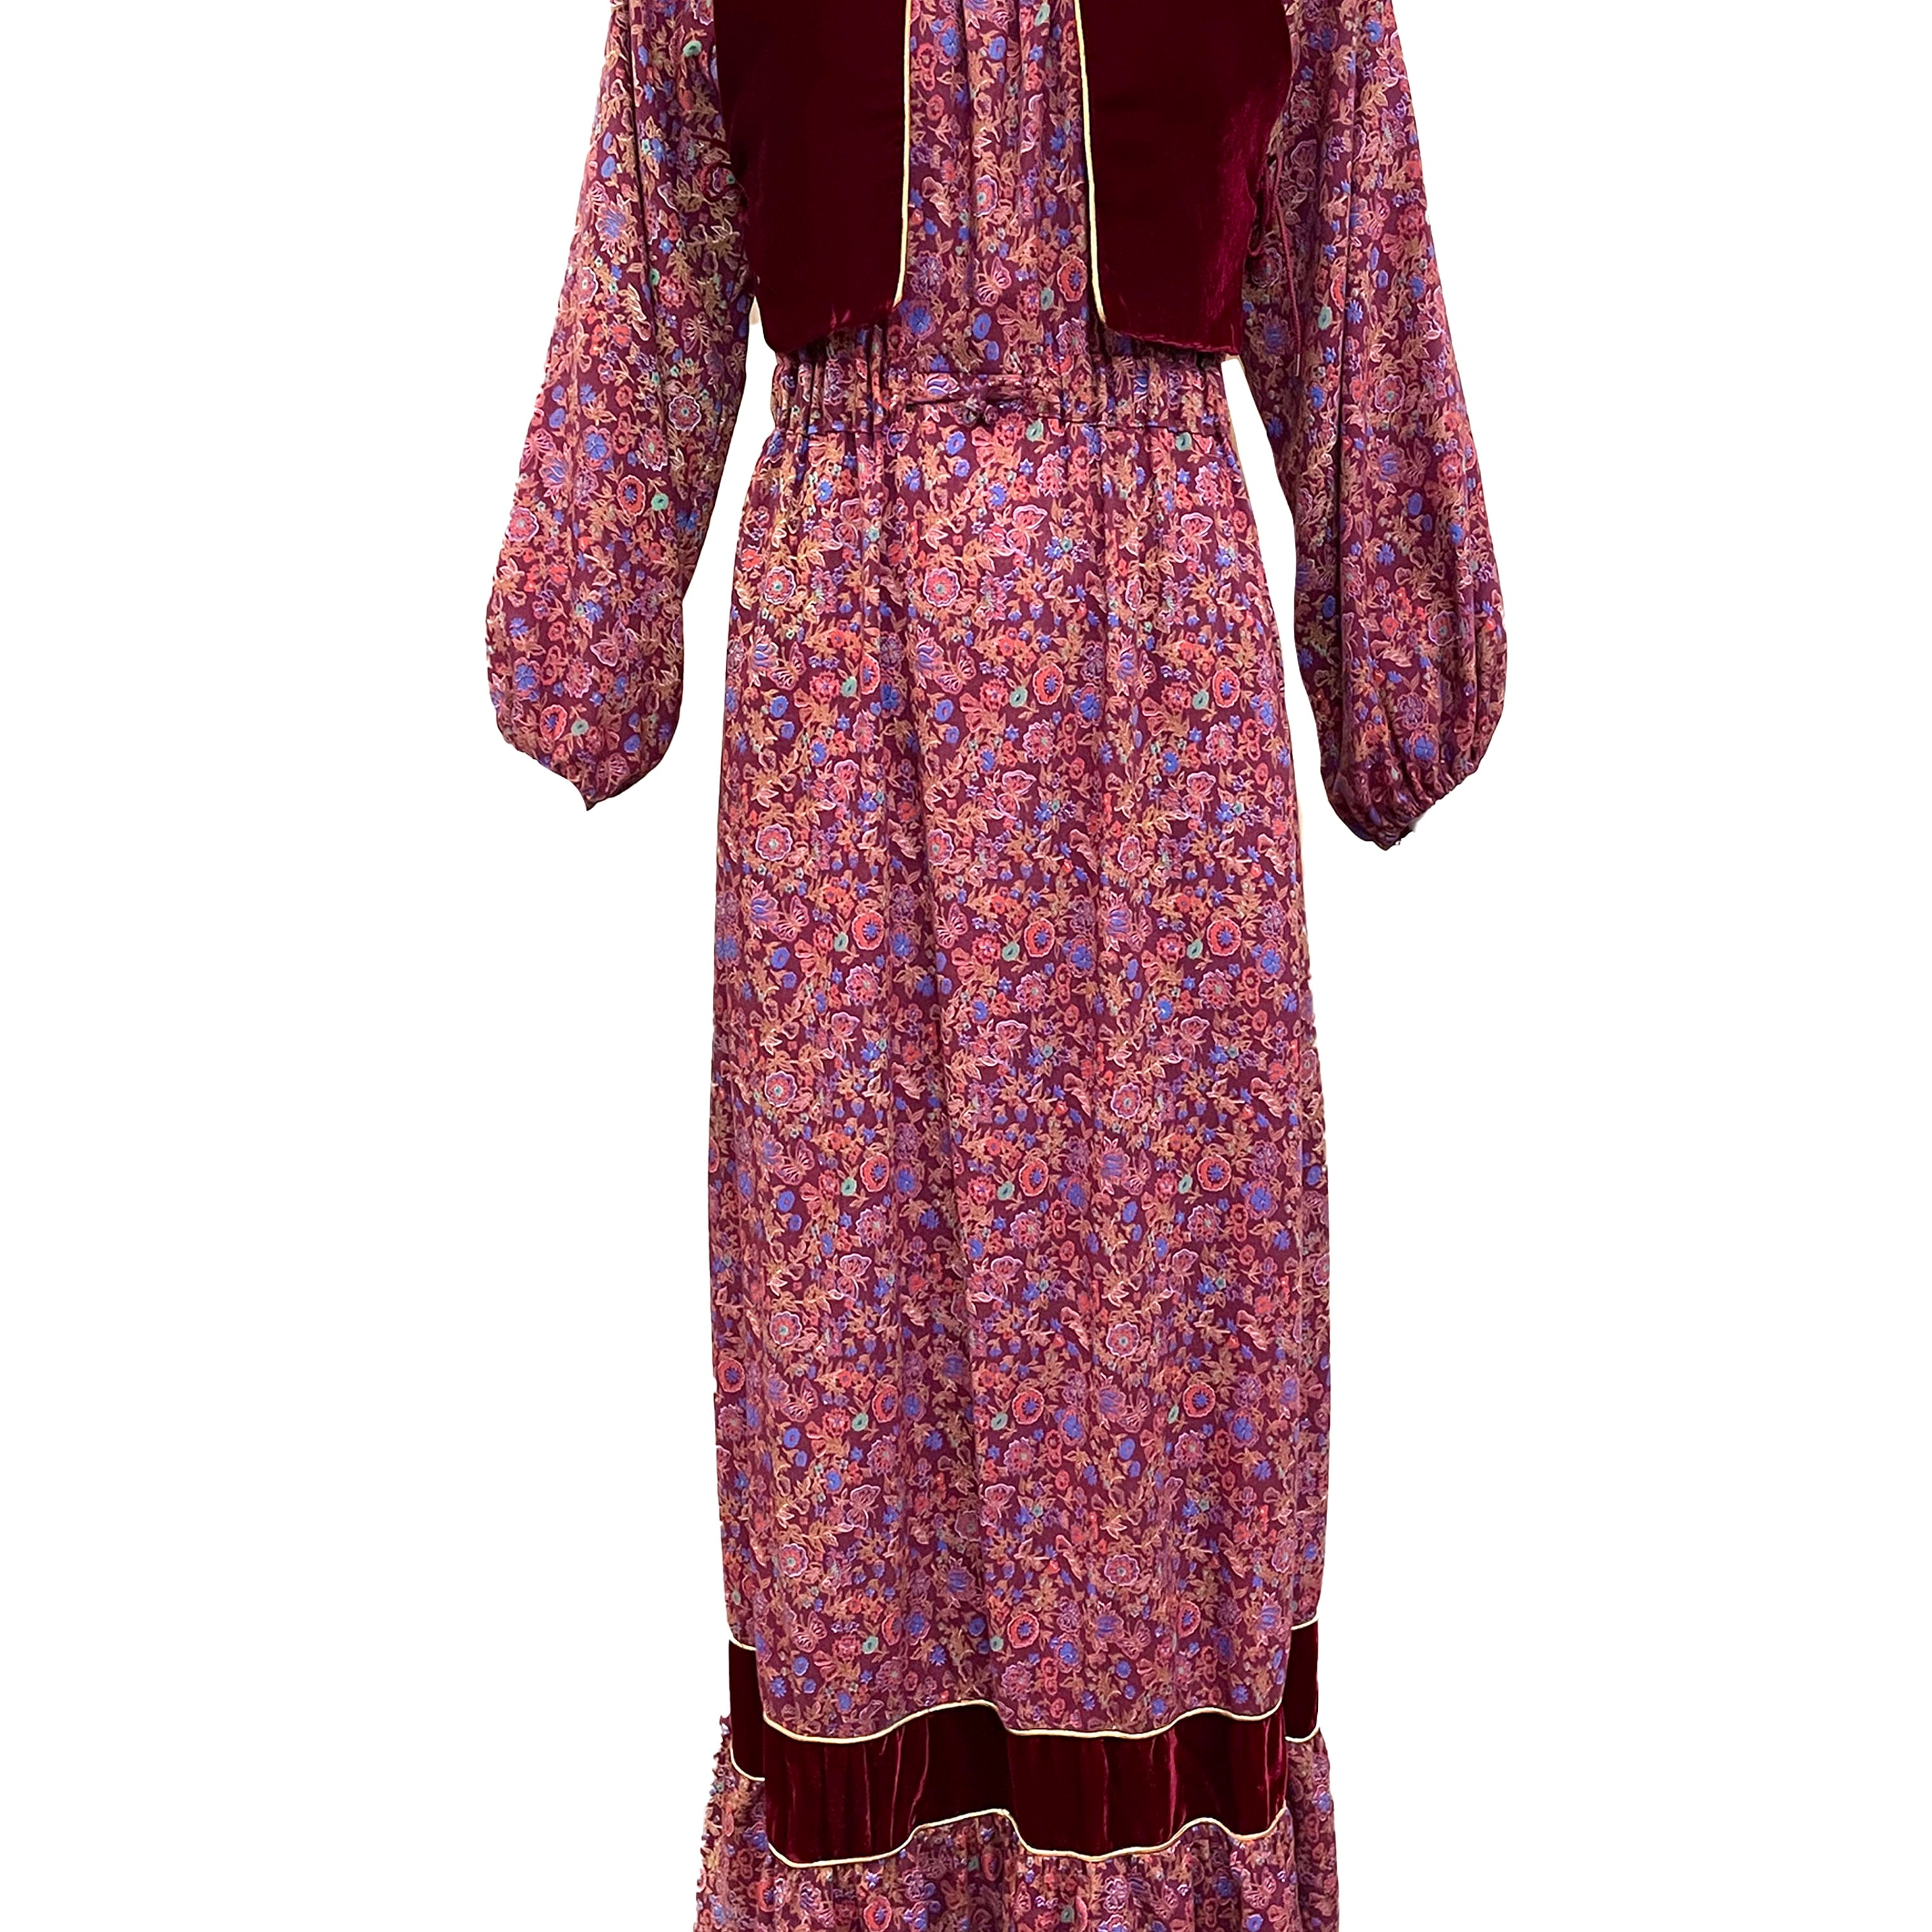 70s Peasant Maxi Dress in Burgundy Floral with Velvet Vest FRONT 1 of 6